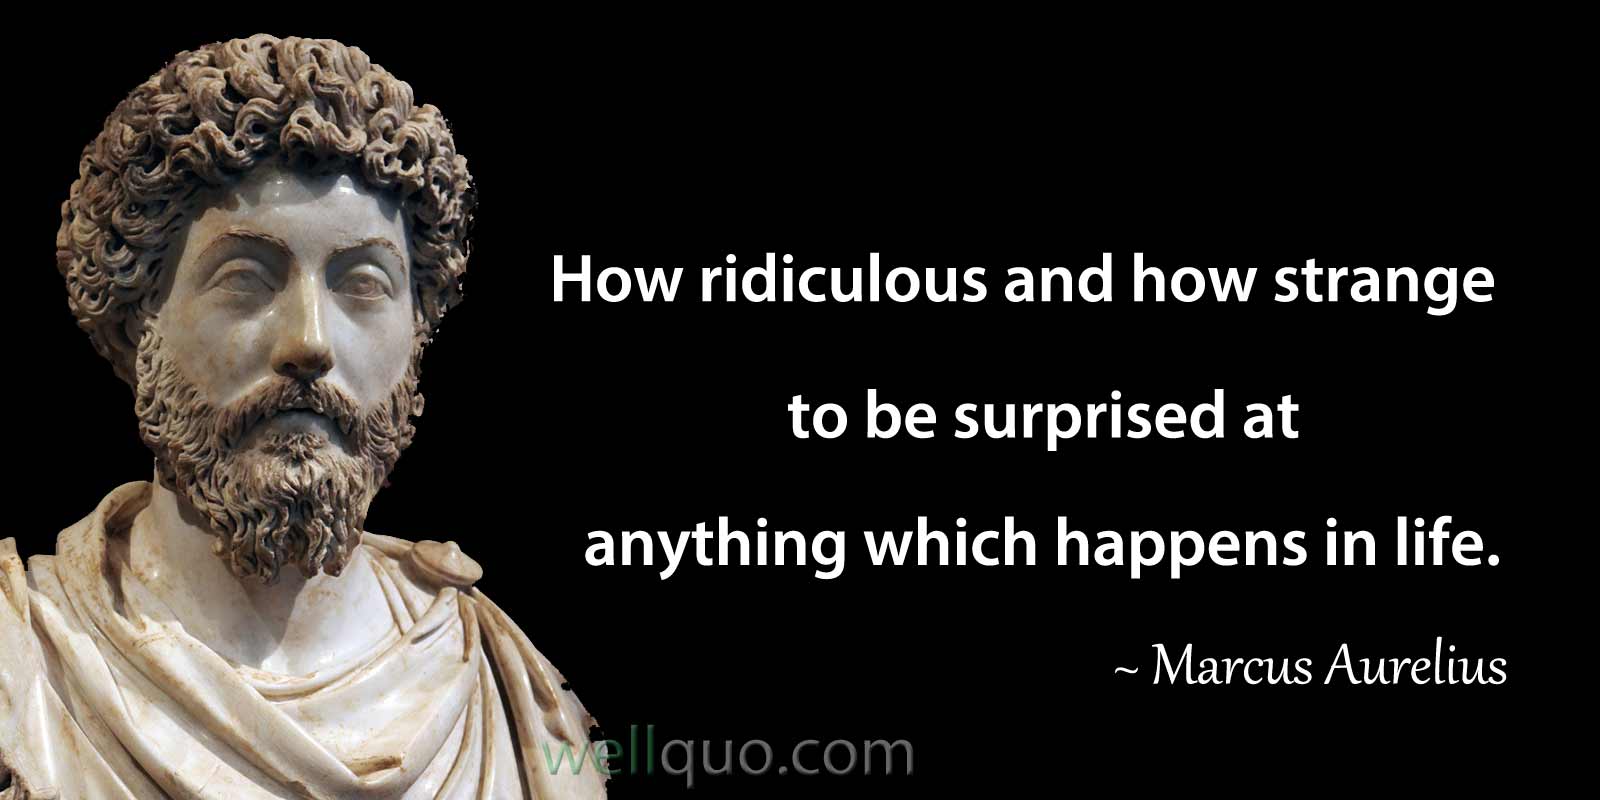 Marcus Aurelius Quotes on Life, Love and Death Well Quo